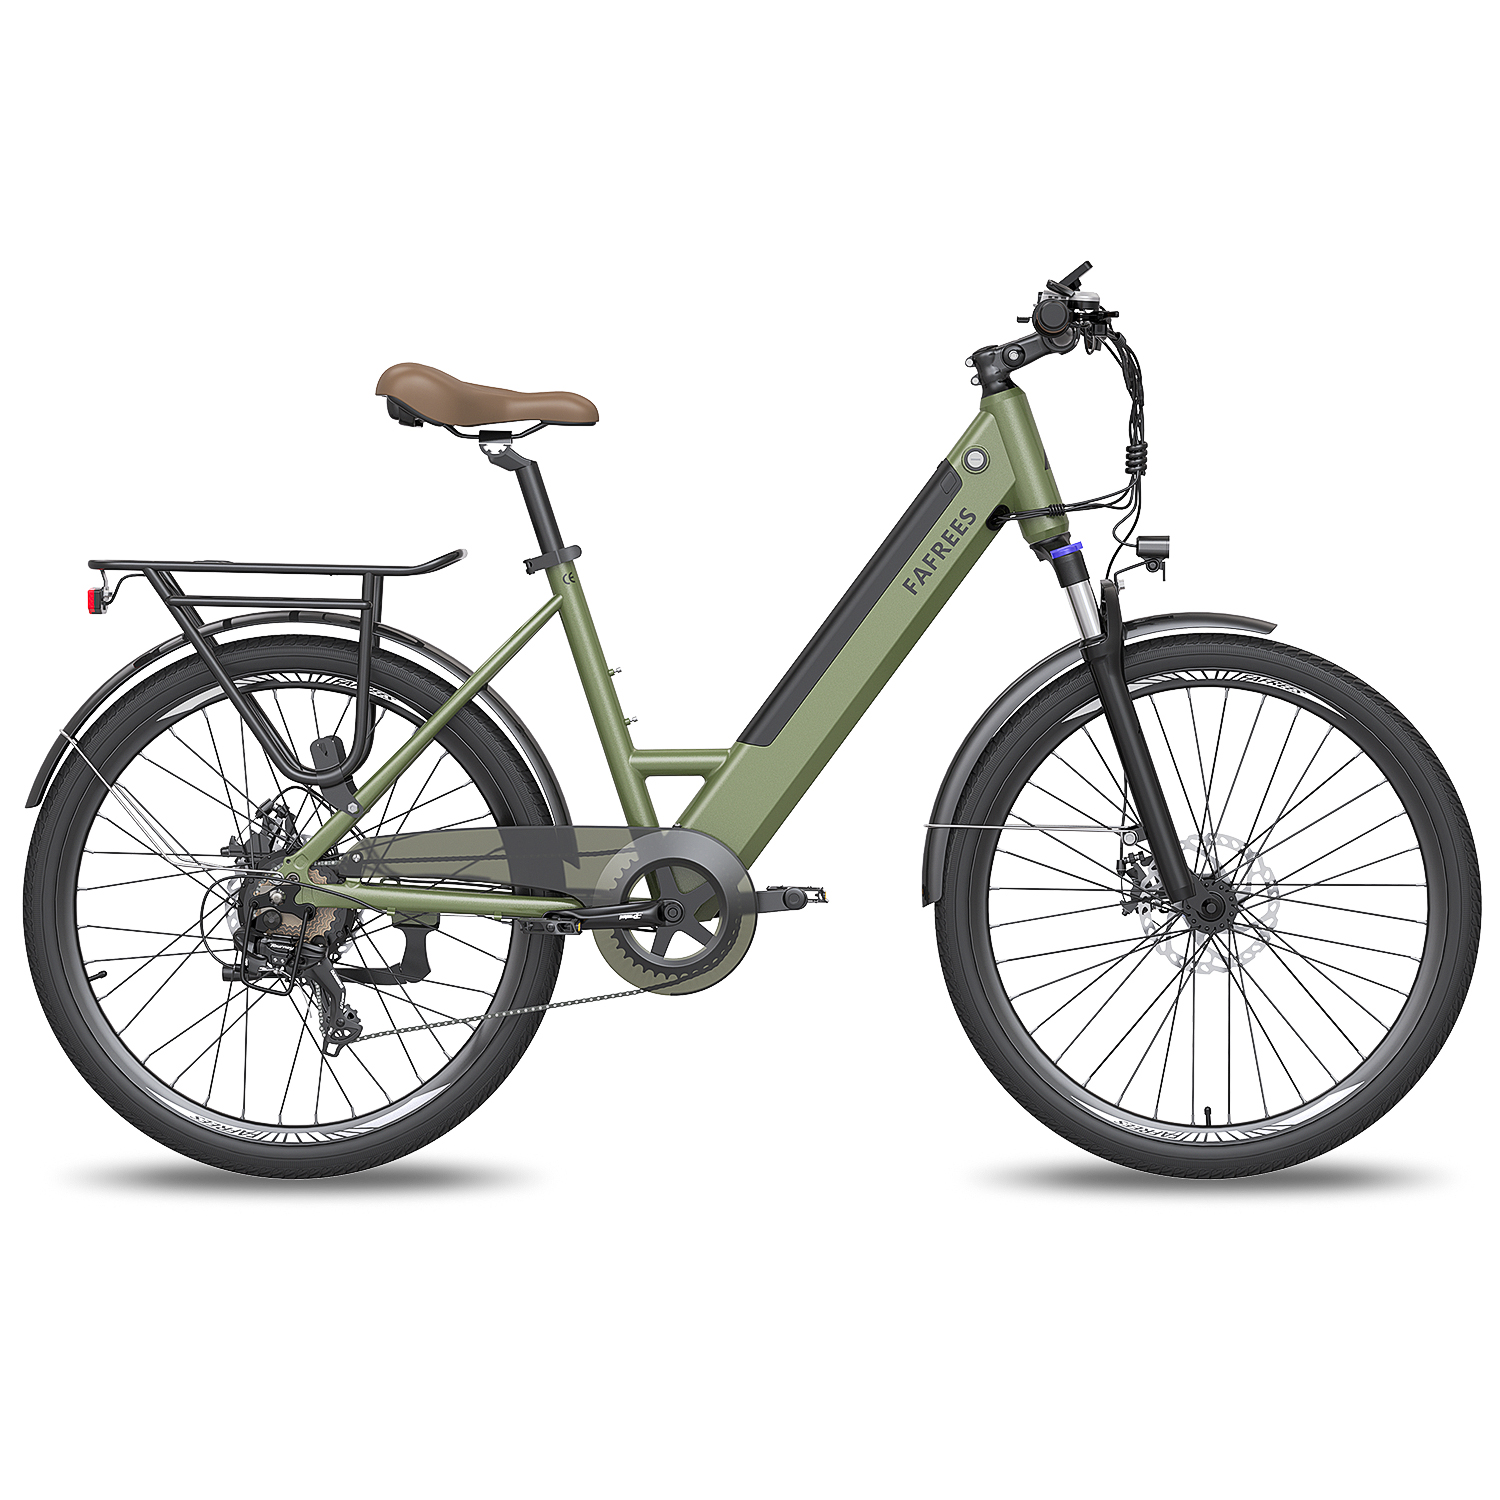 Find EU Direct FAFREES F26 Pro 36V 250W 10Ah 26inch Electric Bicycle 25KM/H Max Speed 70 90KM Max Mileage 120KG Payload Electric Bike for Sale on Gipsybee.com with cryptocurrencies